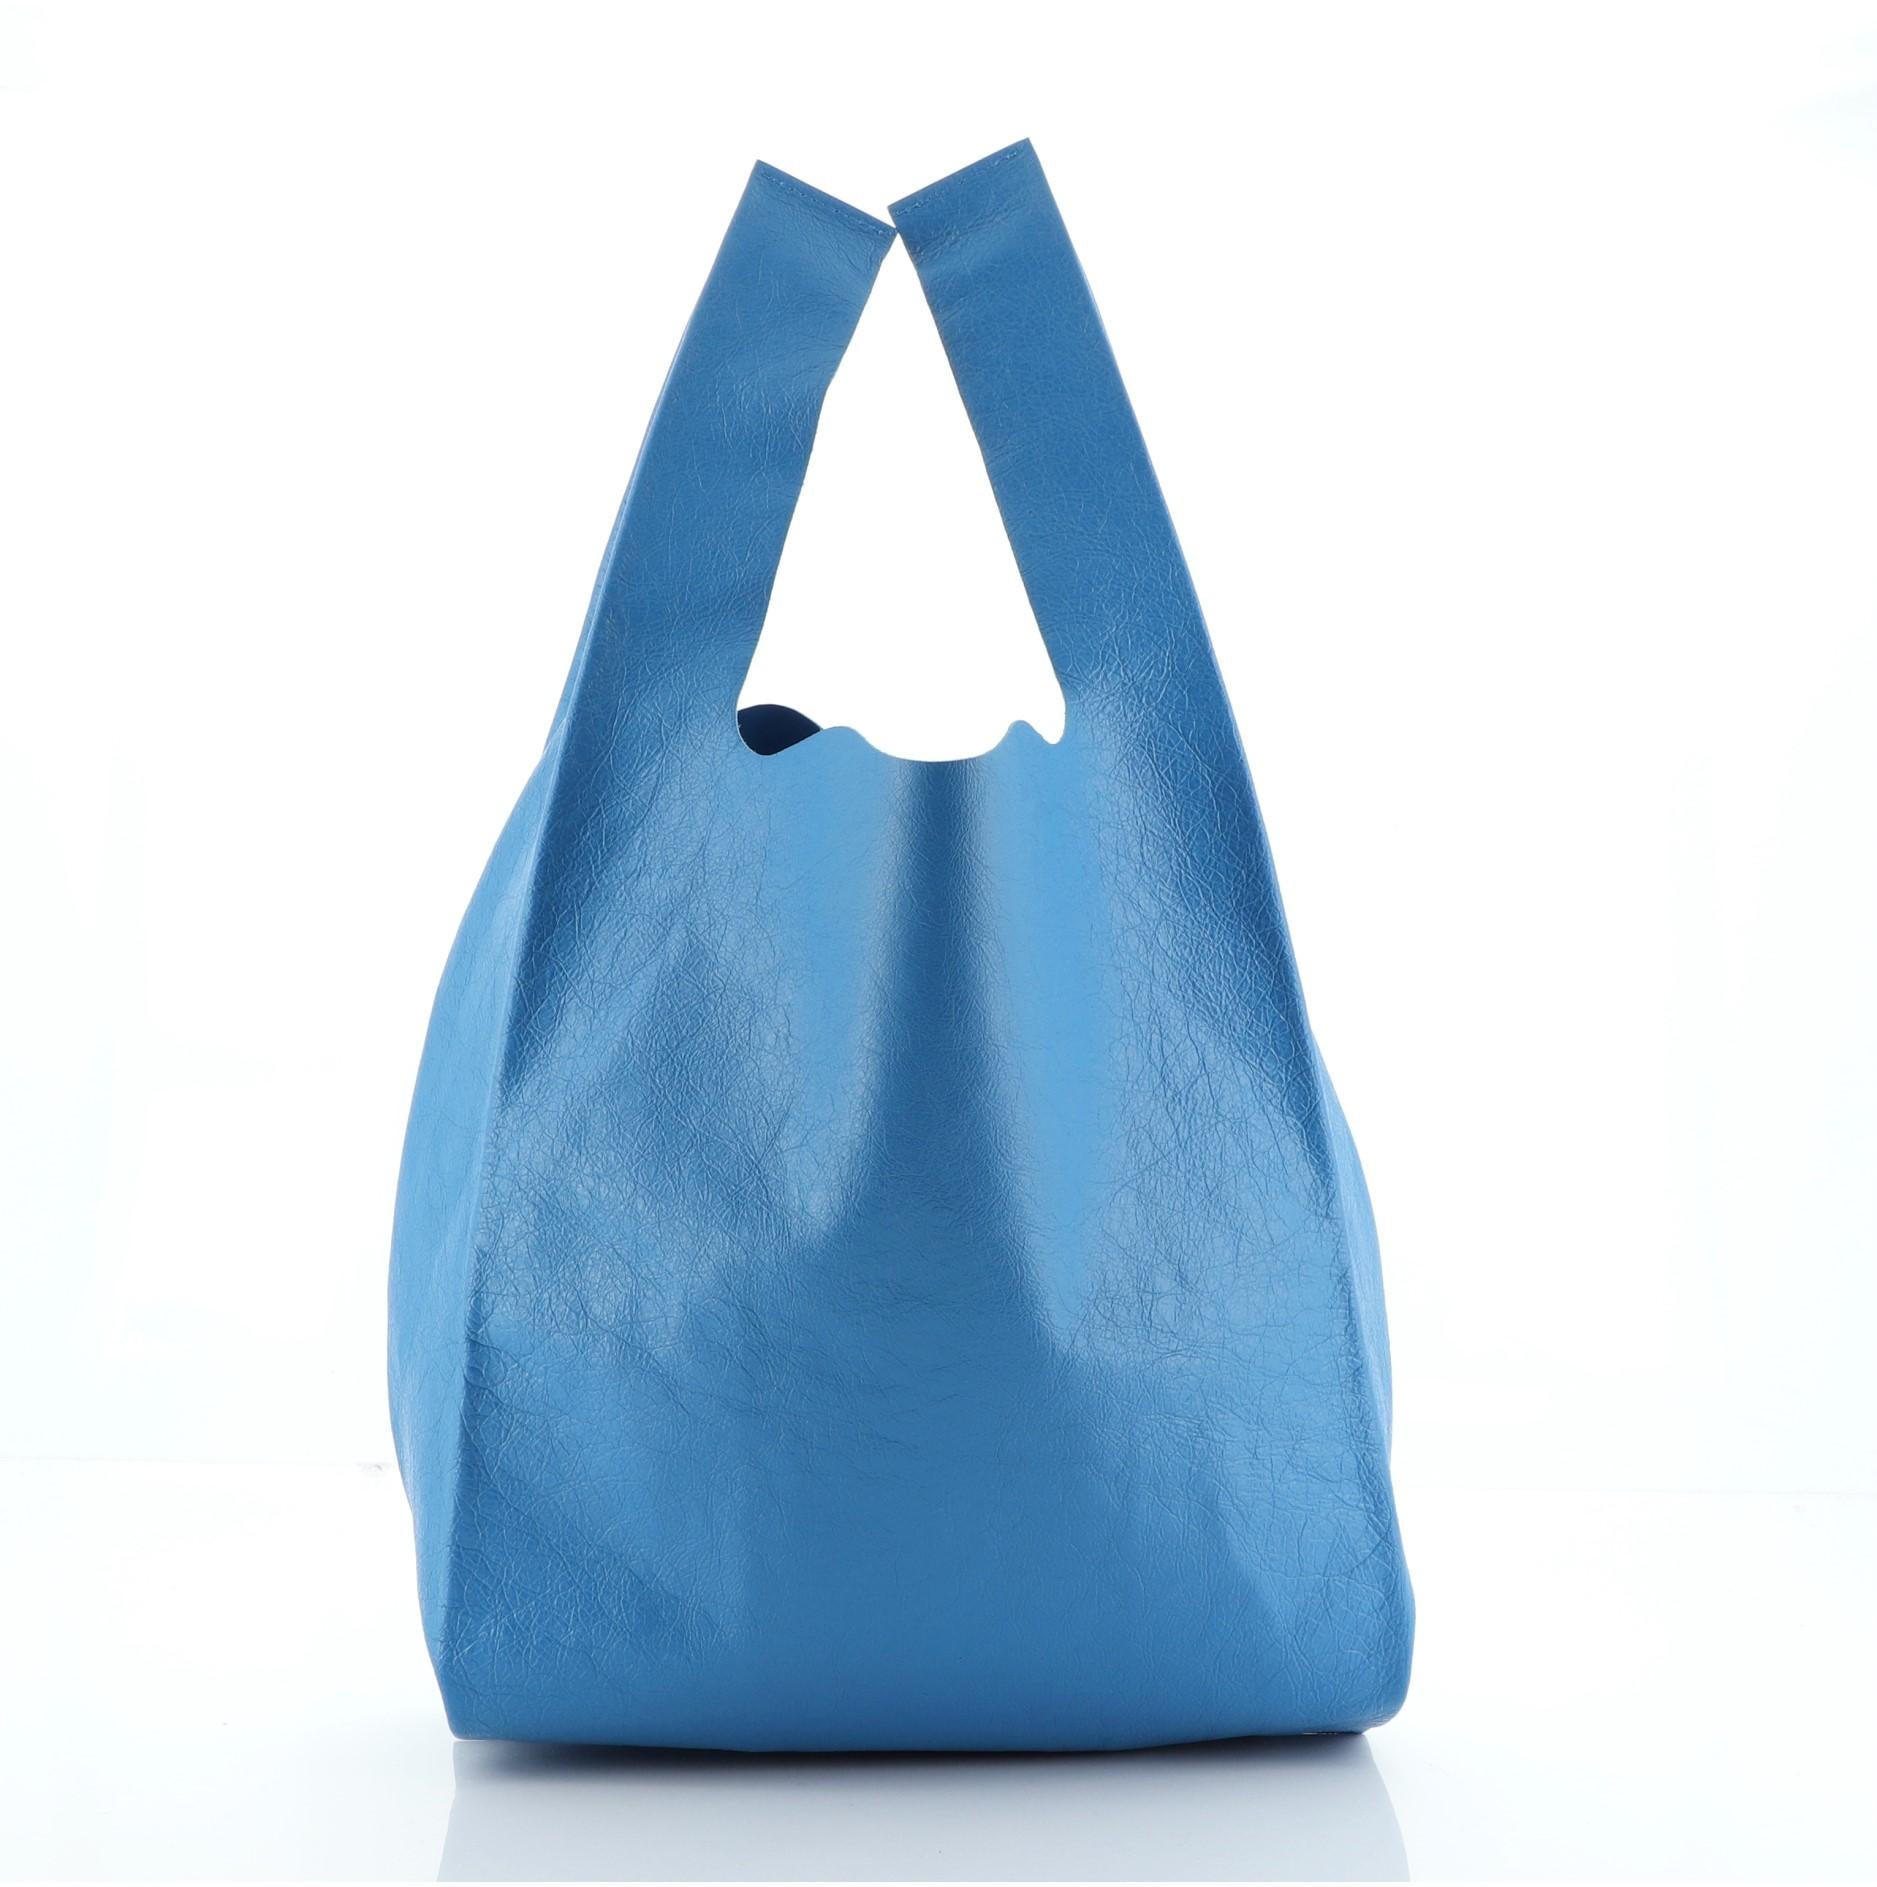 Balenciaga Supermarket Shopper Bag Printed Leather Small
Blue Leather

Condition Details: Minor wear on base corners, light scuffs and wear on exterior and in interior.

45020MSC

Height 15